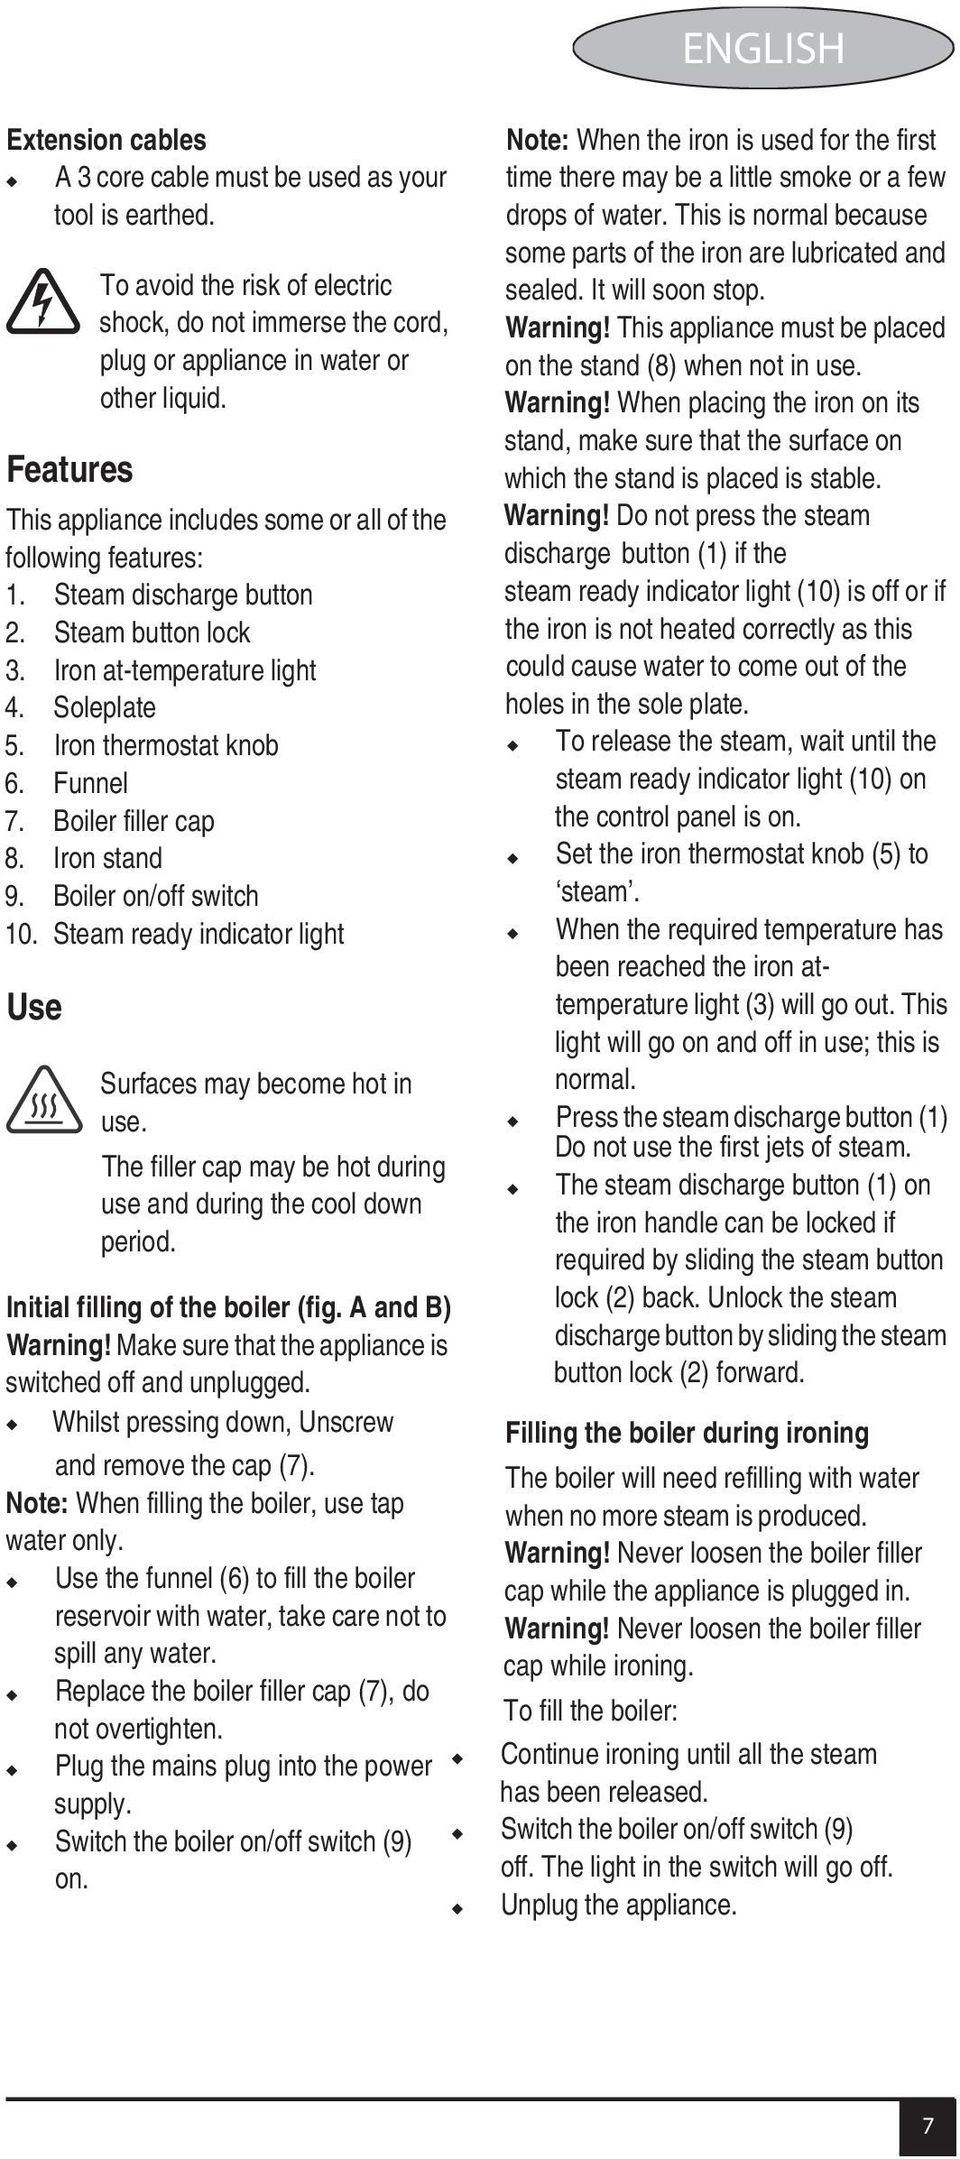 Steam ready indicator light Use To avoid the risk of electric shock, do not immerse the cord, plug or appliance in water or other liquid. Surfaces may become hot in use.